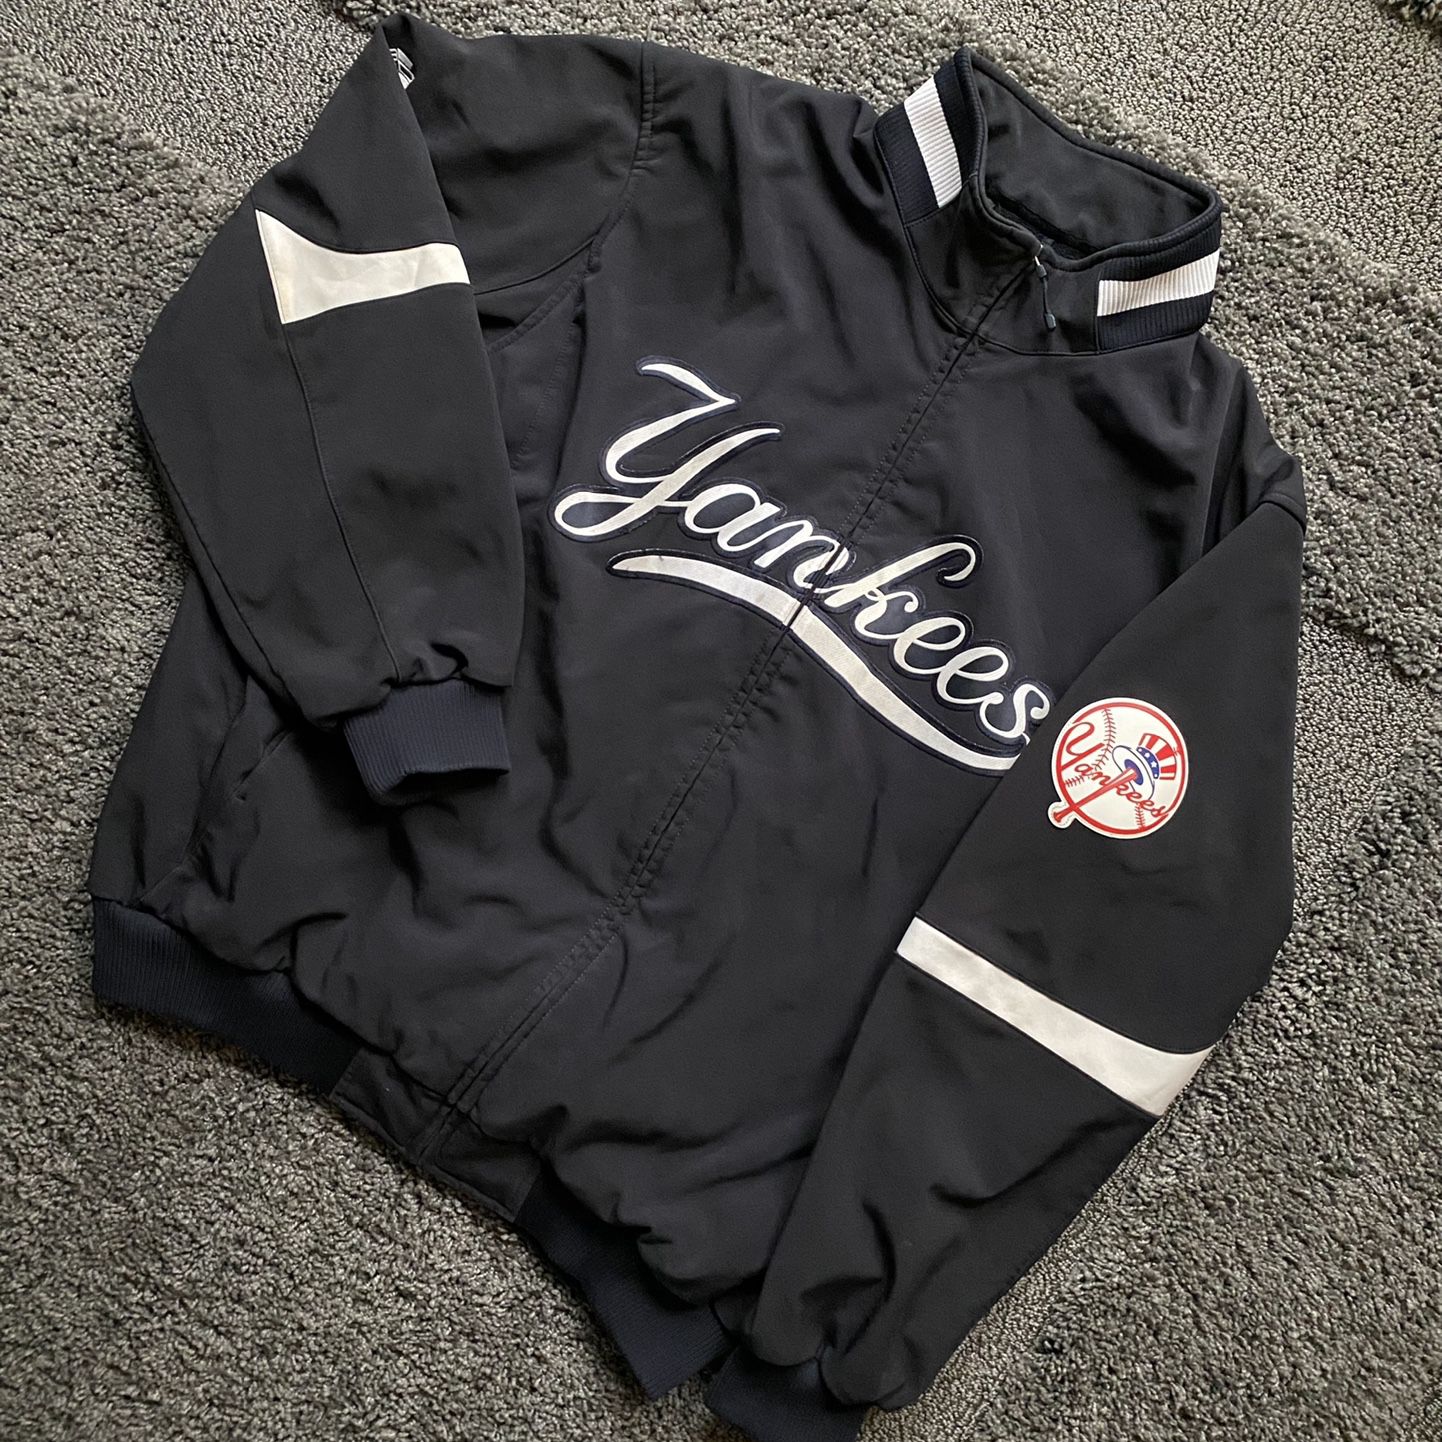 Vintage 2000's New York Yankees Jacket for Sale in Covington, WA - OfferUp